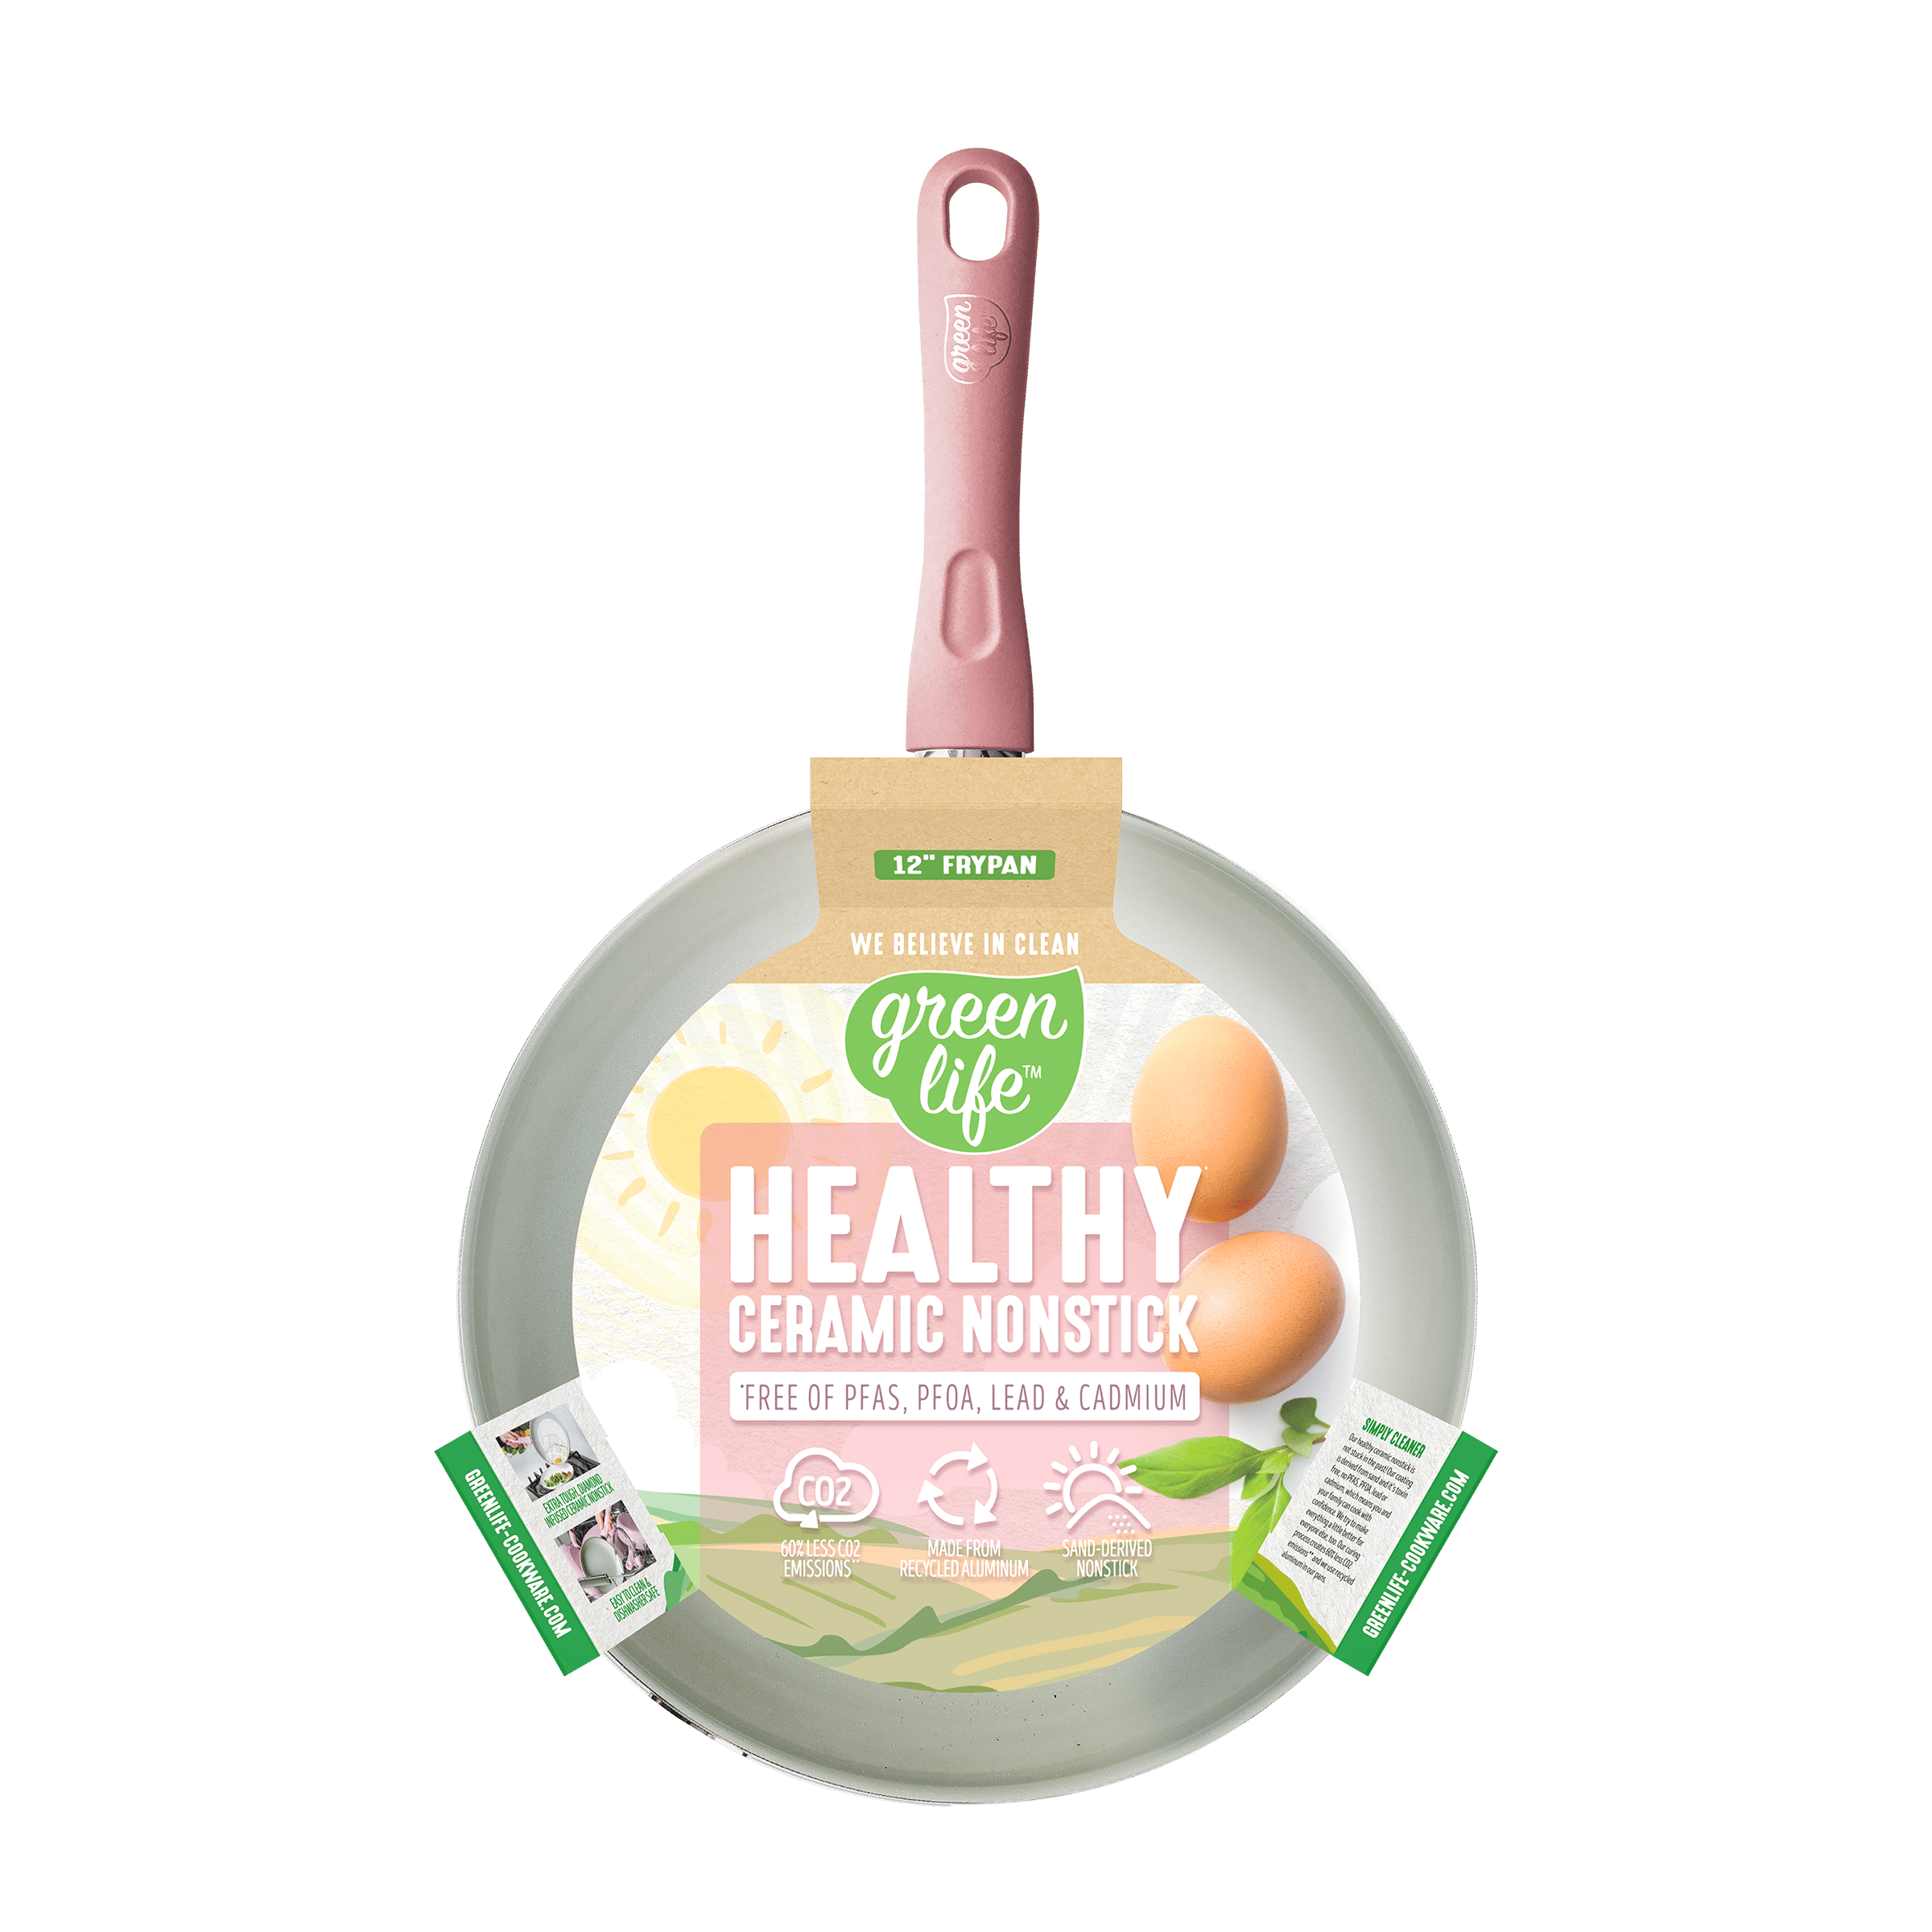 A Non-Stick Pan That Lives up to Its Name, Food & Nutrition